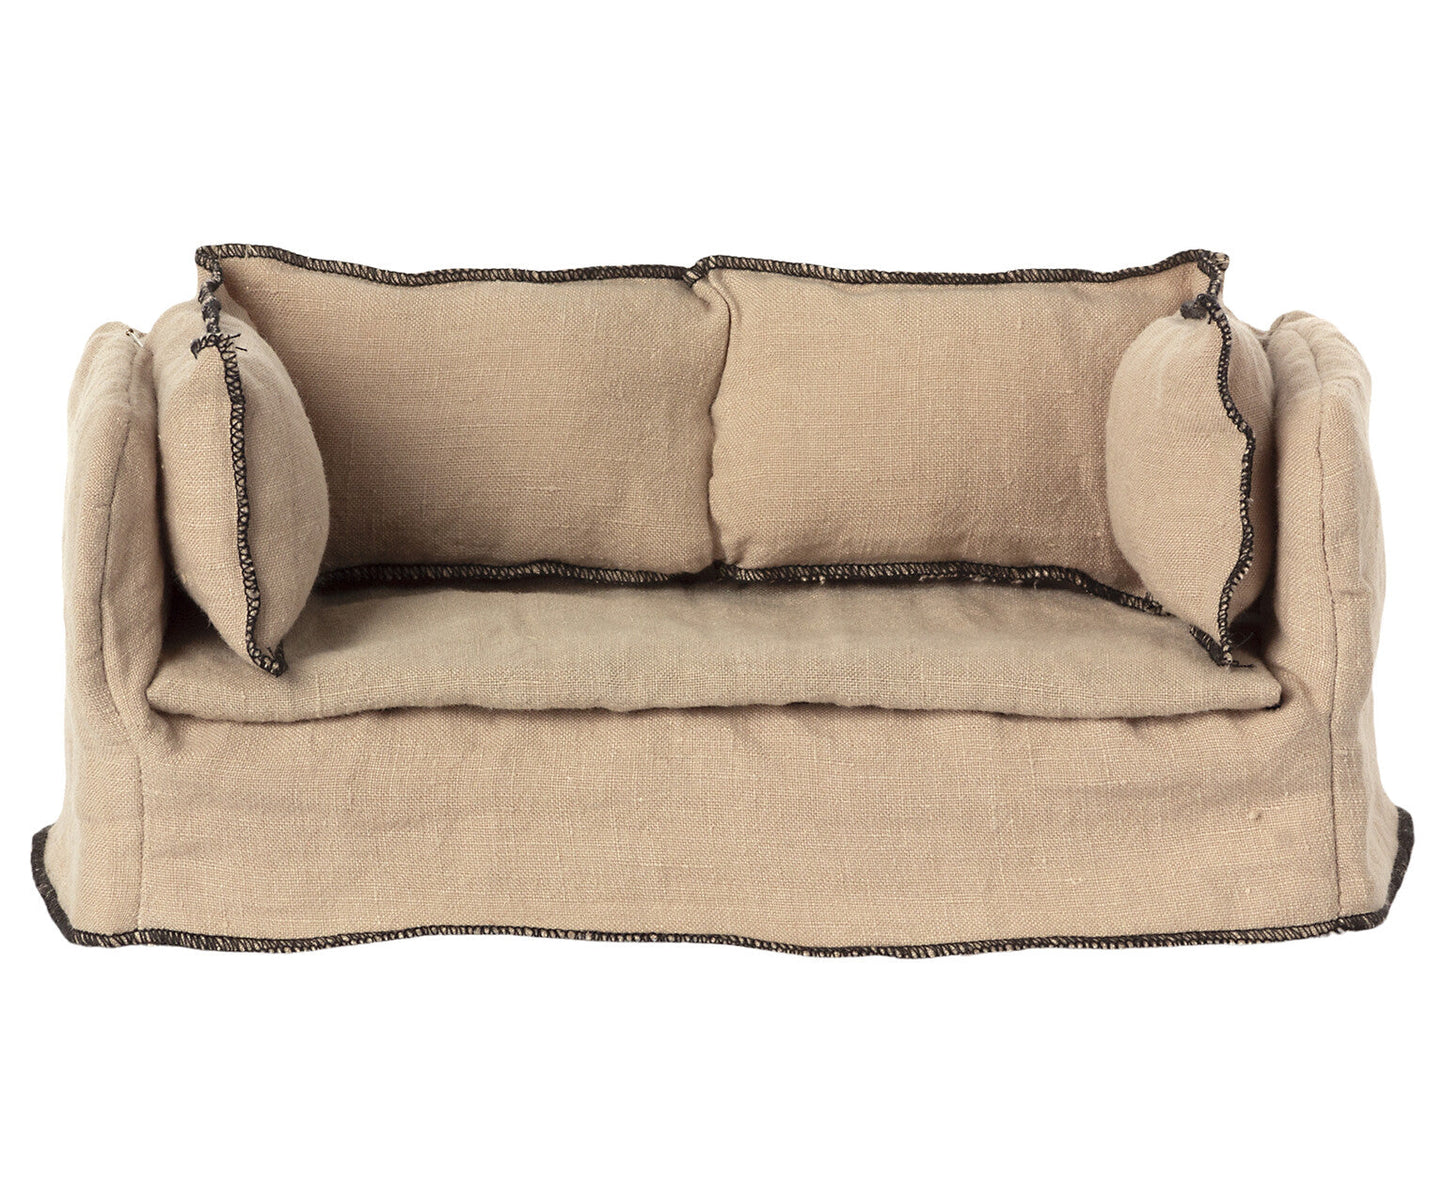 Miniature Couch - Maileg